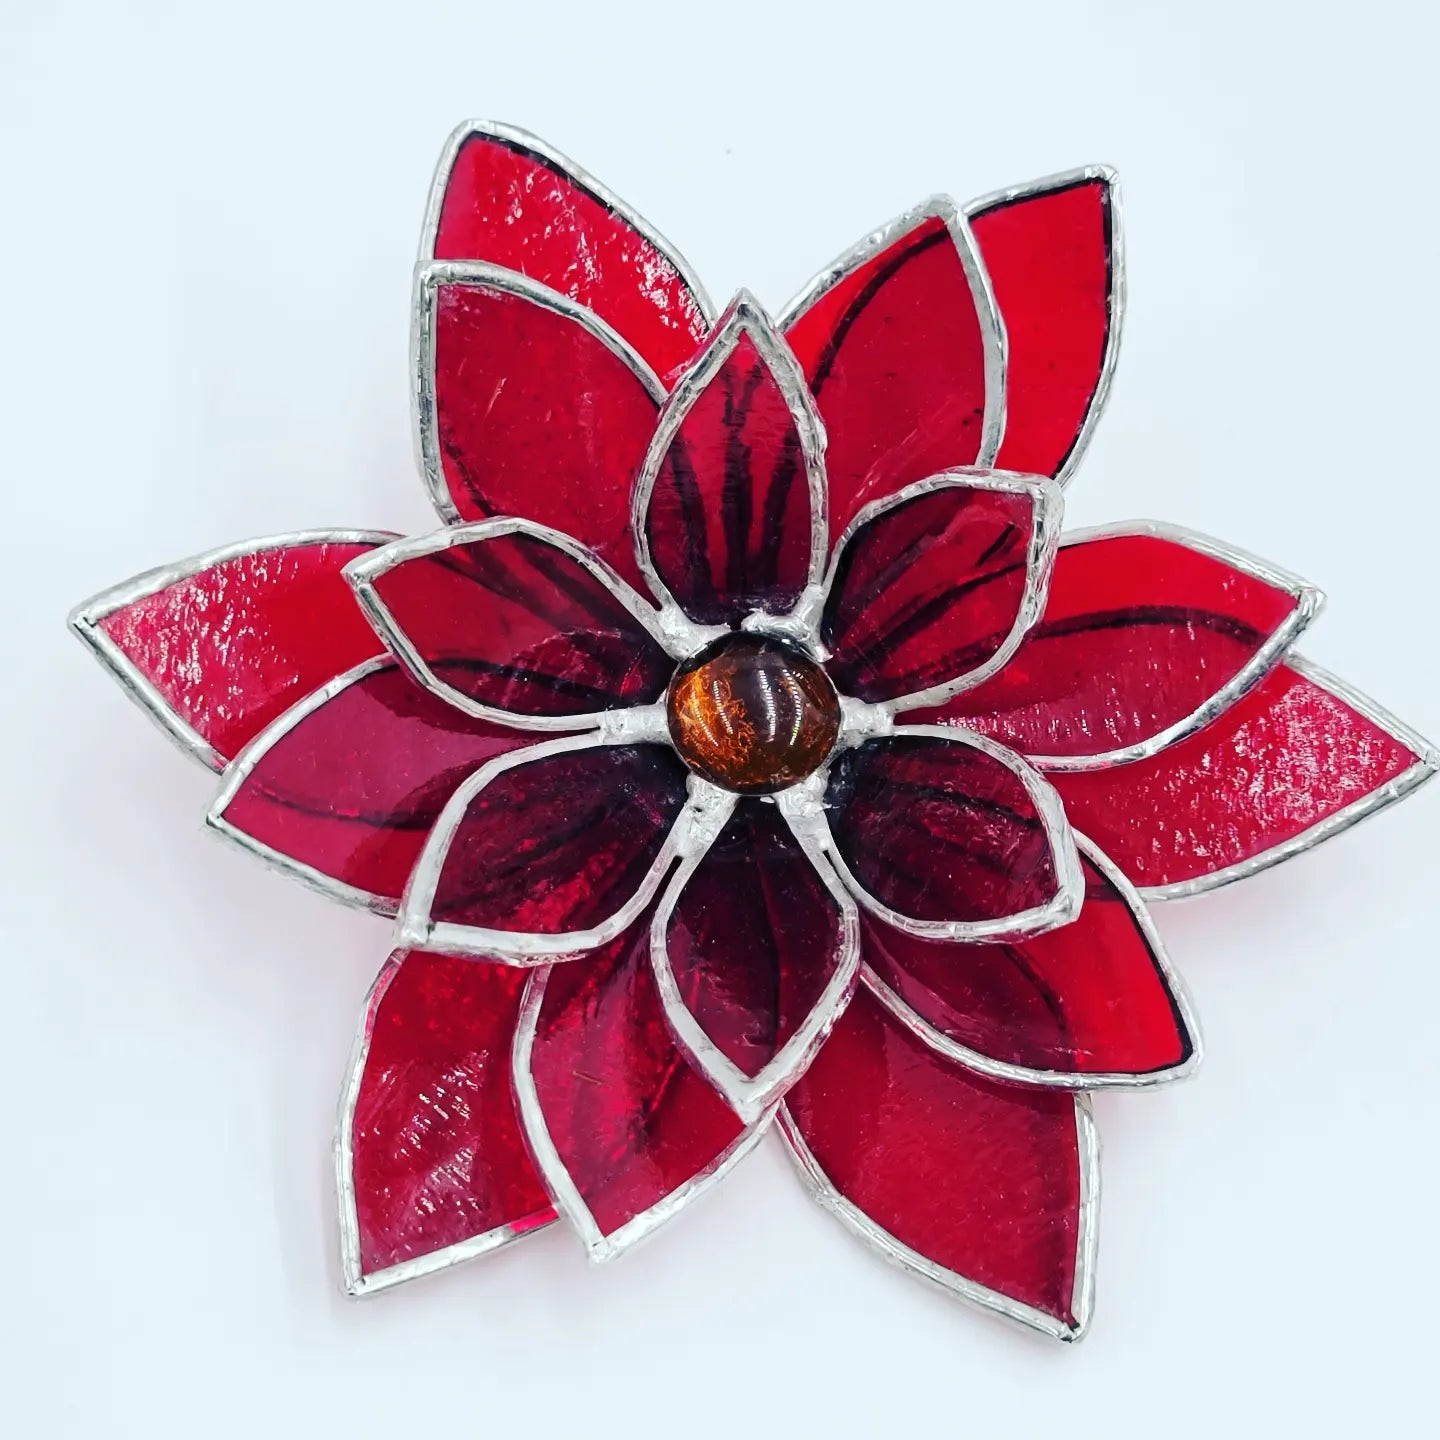 Lotus flower stained glass table decor